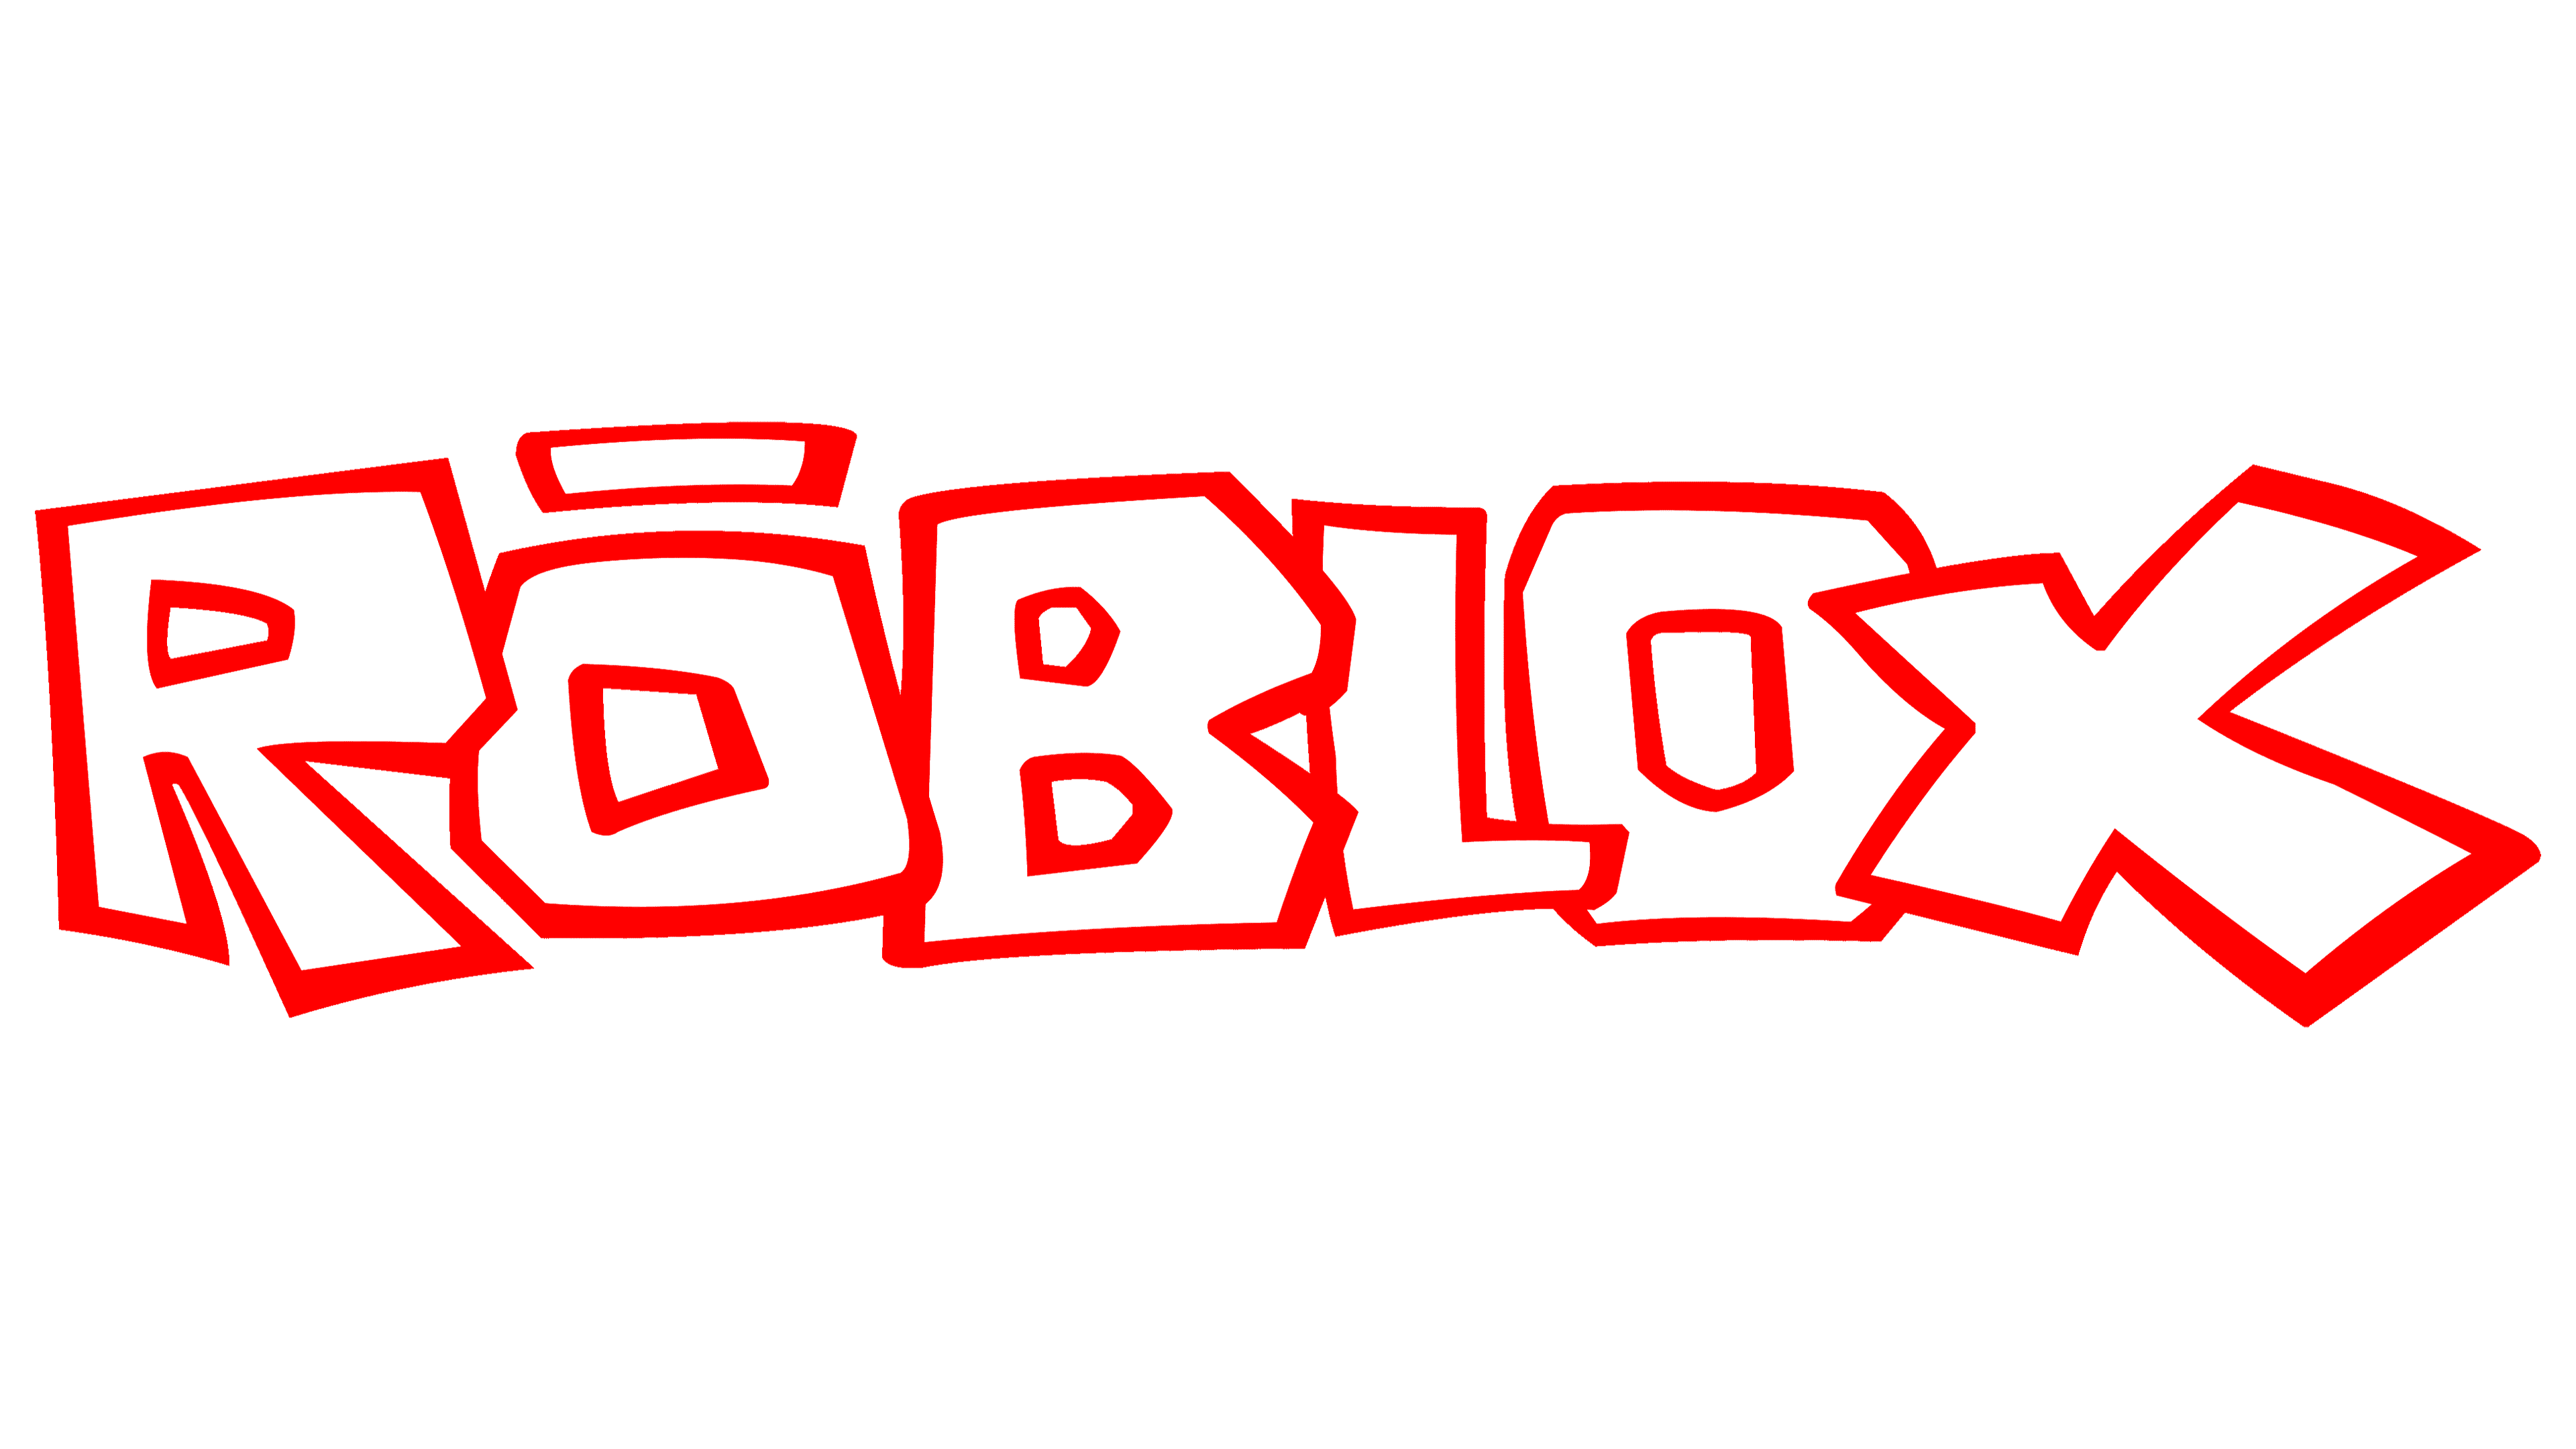 Brand New: New Logo for Roblox